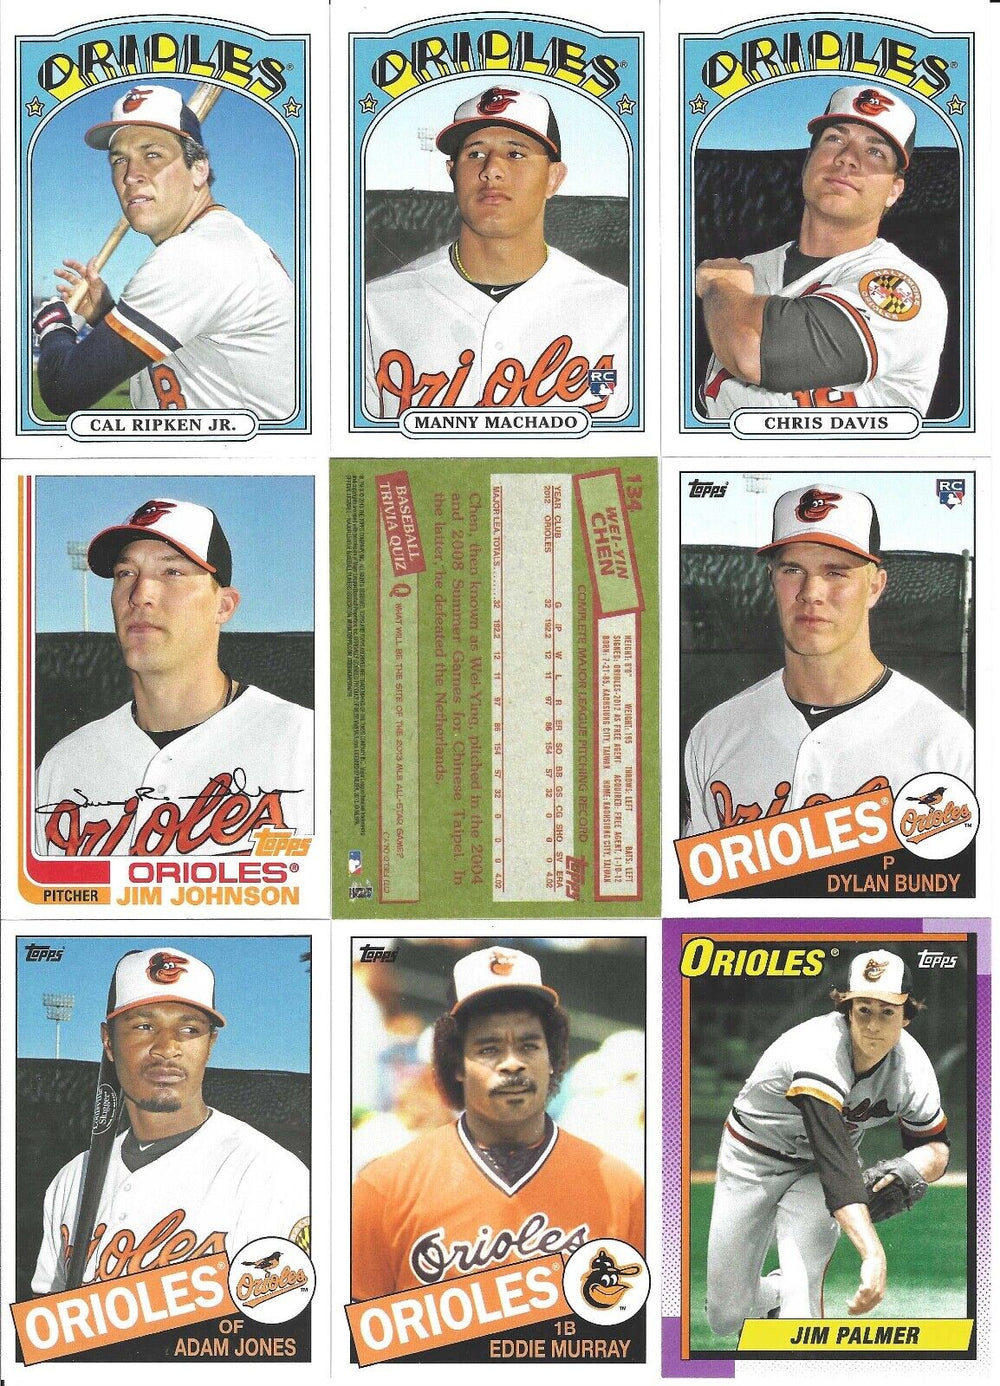 Baltimore Orioles 2013 Topps ARCHIVES Team Set with Manny Machado Rookie Card and Cal Ripken Plus